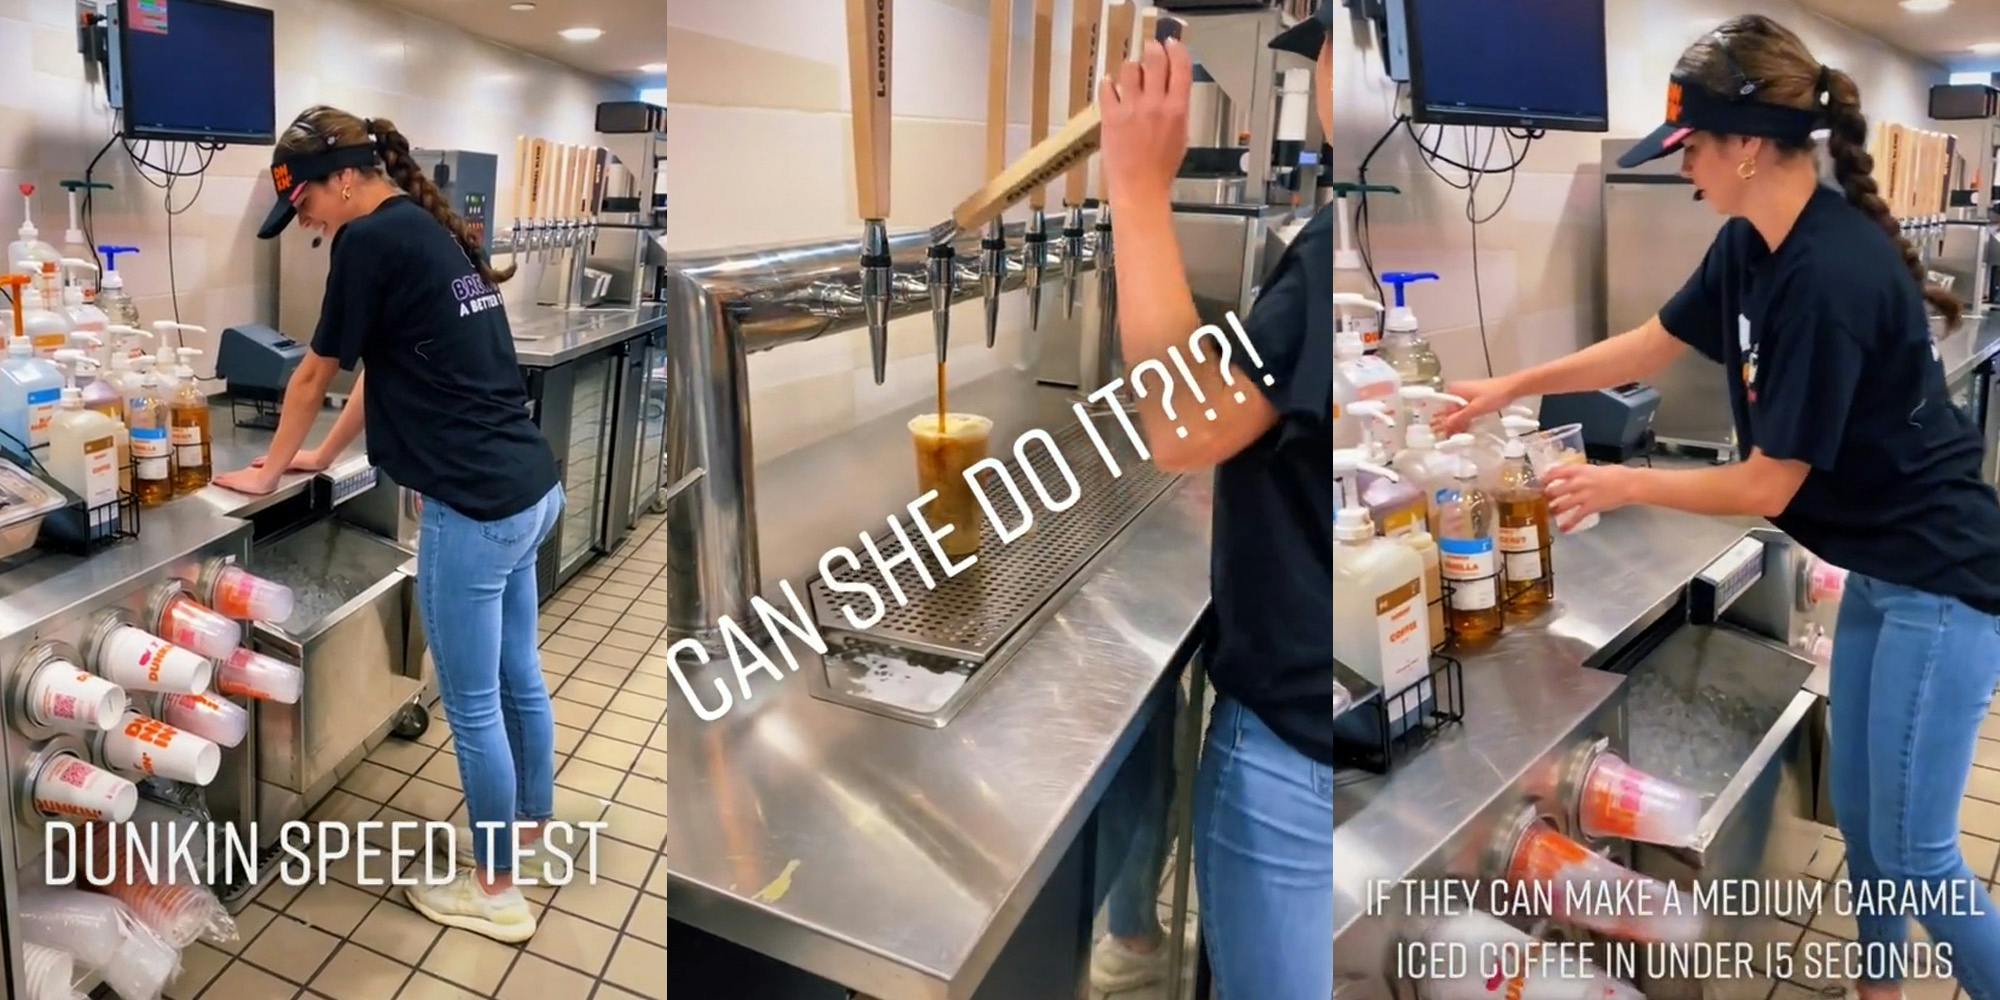 Dunkin worker hands on table caption "DUNKIN SPEED TEST" (l) Dunkin worker using pump in coffee caption "CAN SHE DO IT?!?!" (c) Dunkin worker pumping flavor into coffee caption "IF THEY CAN MAKE A MEDIUM CARMEL ICED COFFEE IN UNDER 15 SECONDS" (r)